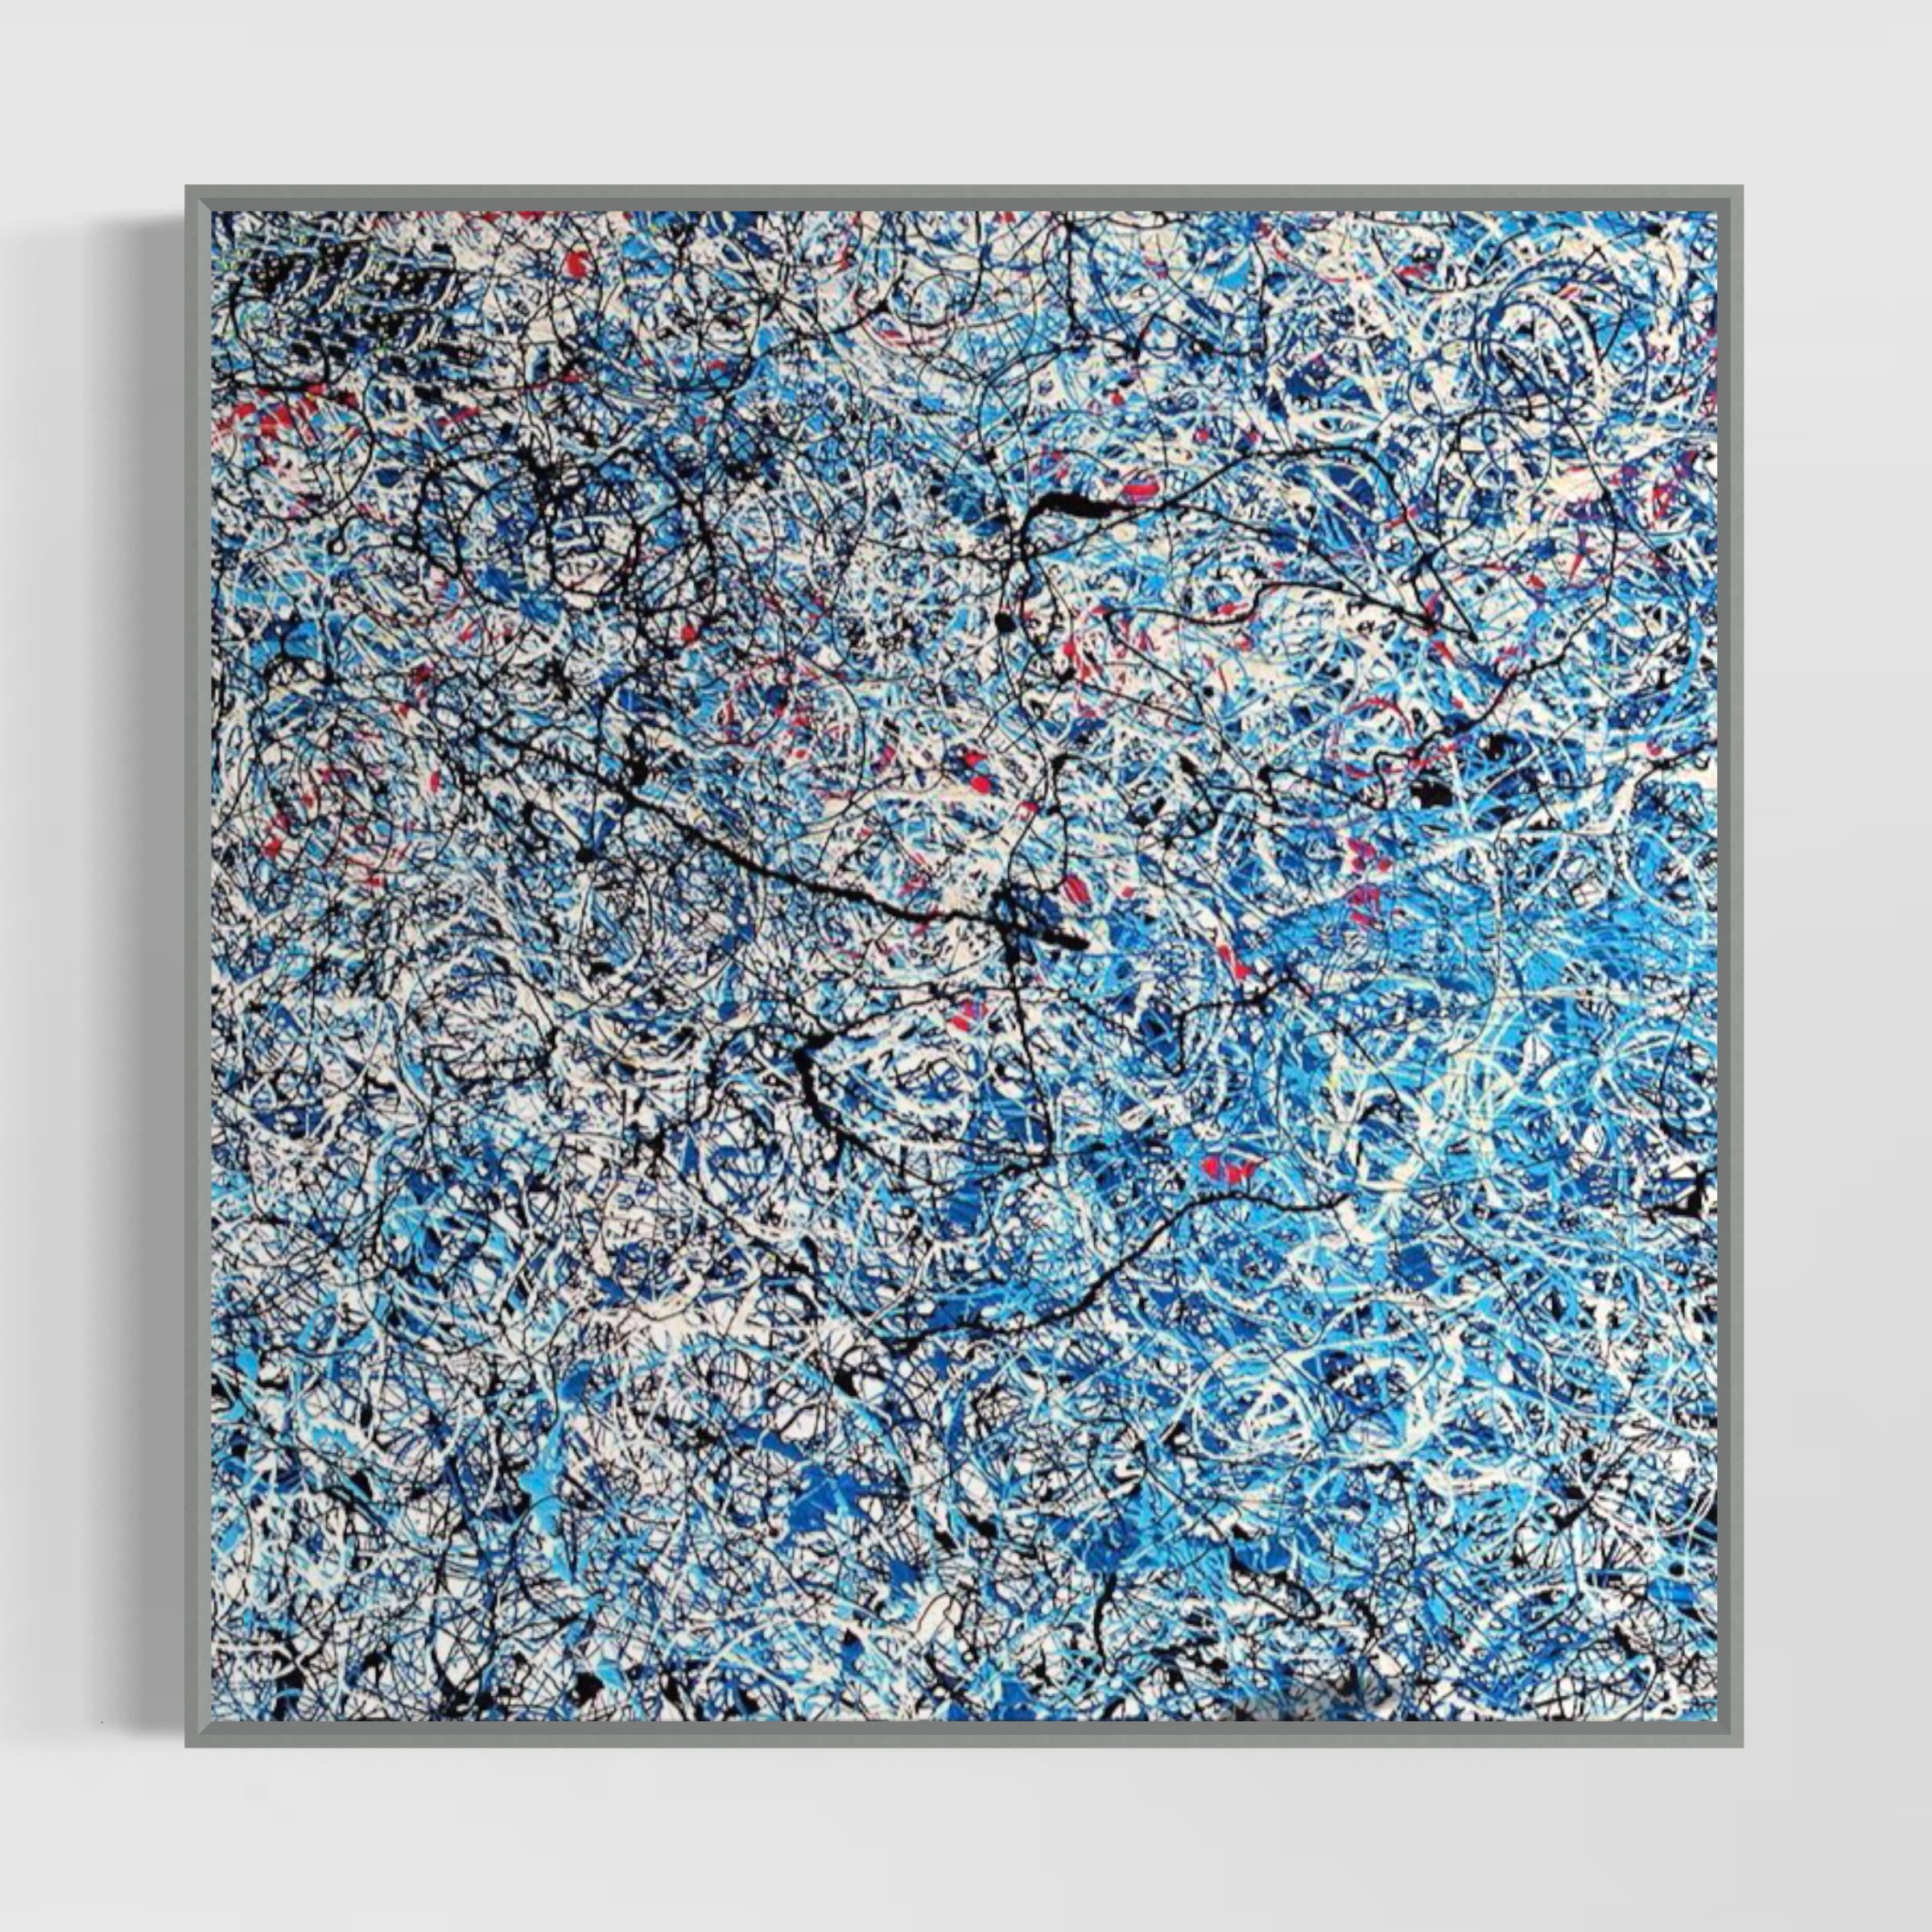 Gentle 1, Gallery Wrap (With Bleed) / 100x100cm